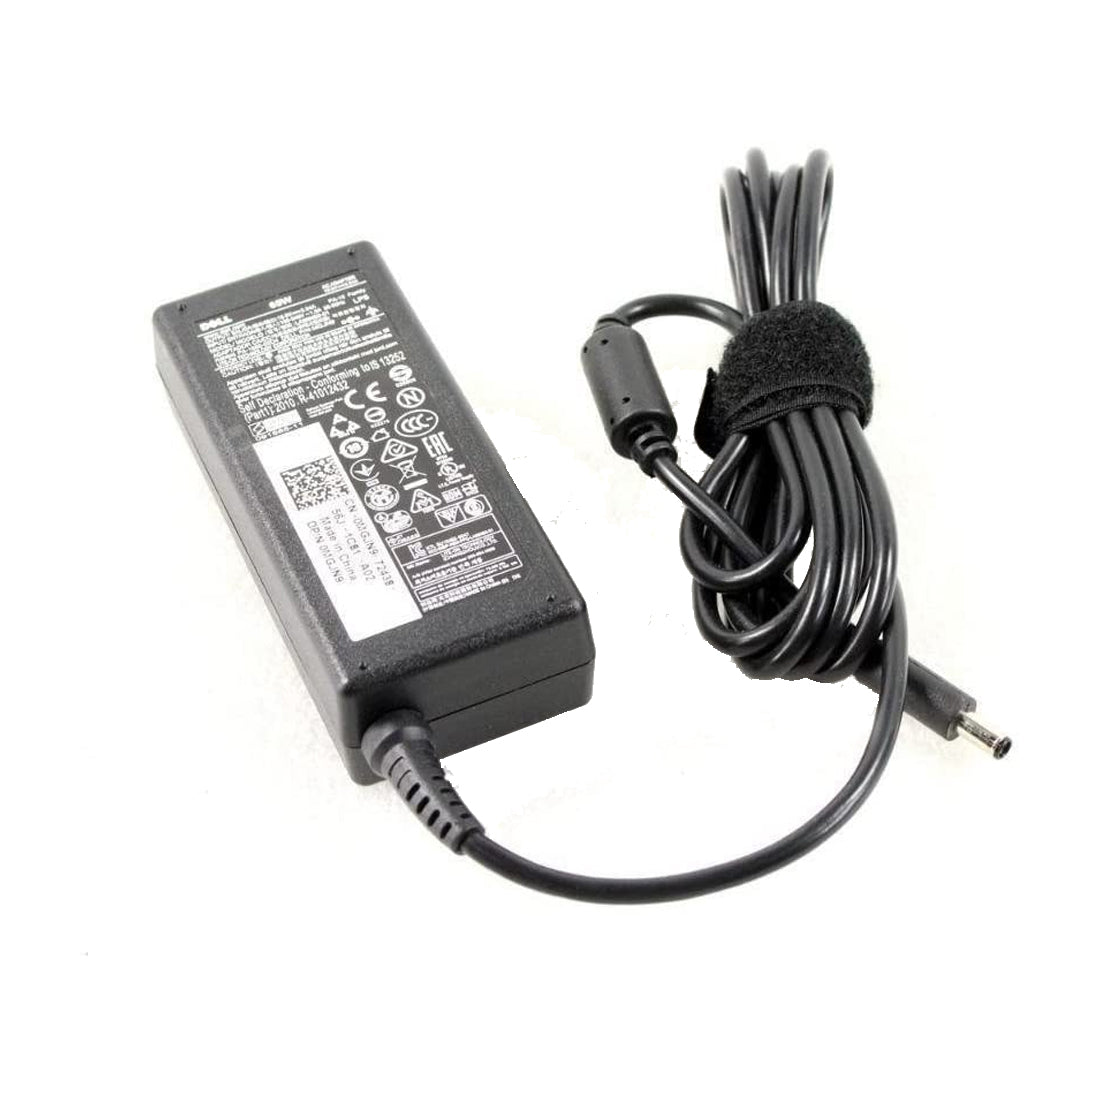 Dell Original 65W 19.5V 4.5mm Pin Laptop Charger Adapter for Inspiron 17 7779 With Power Cord